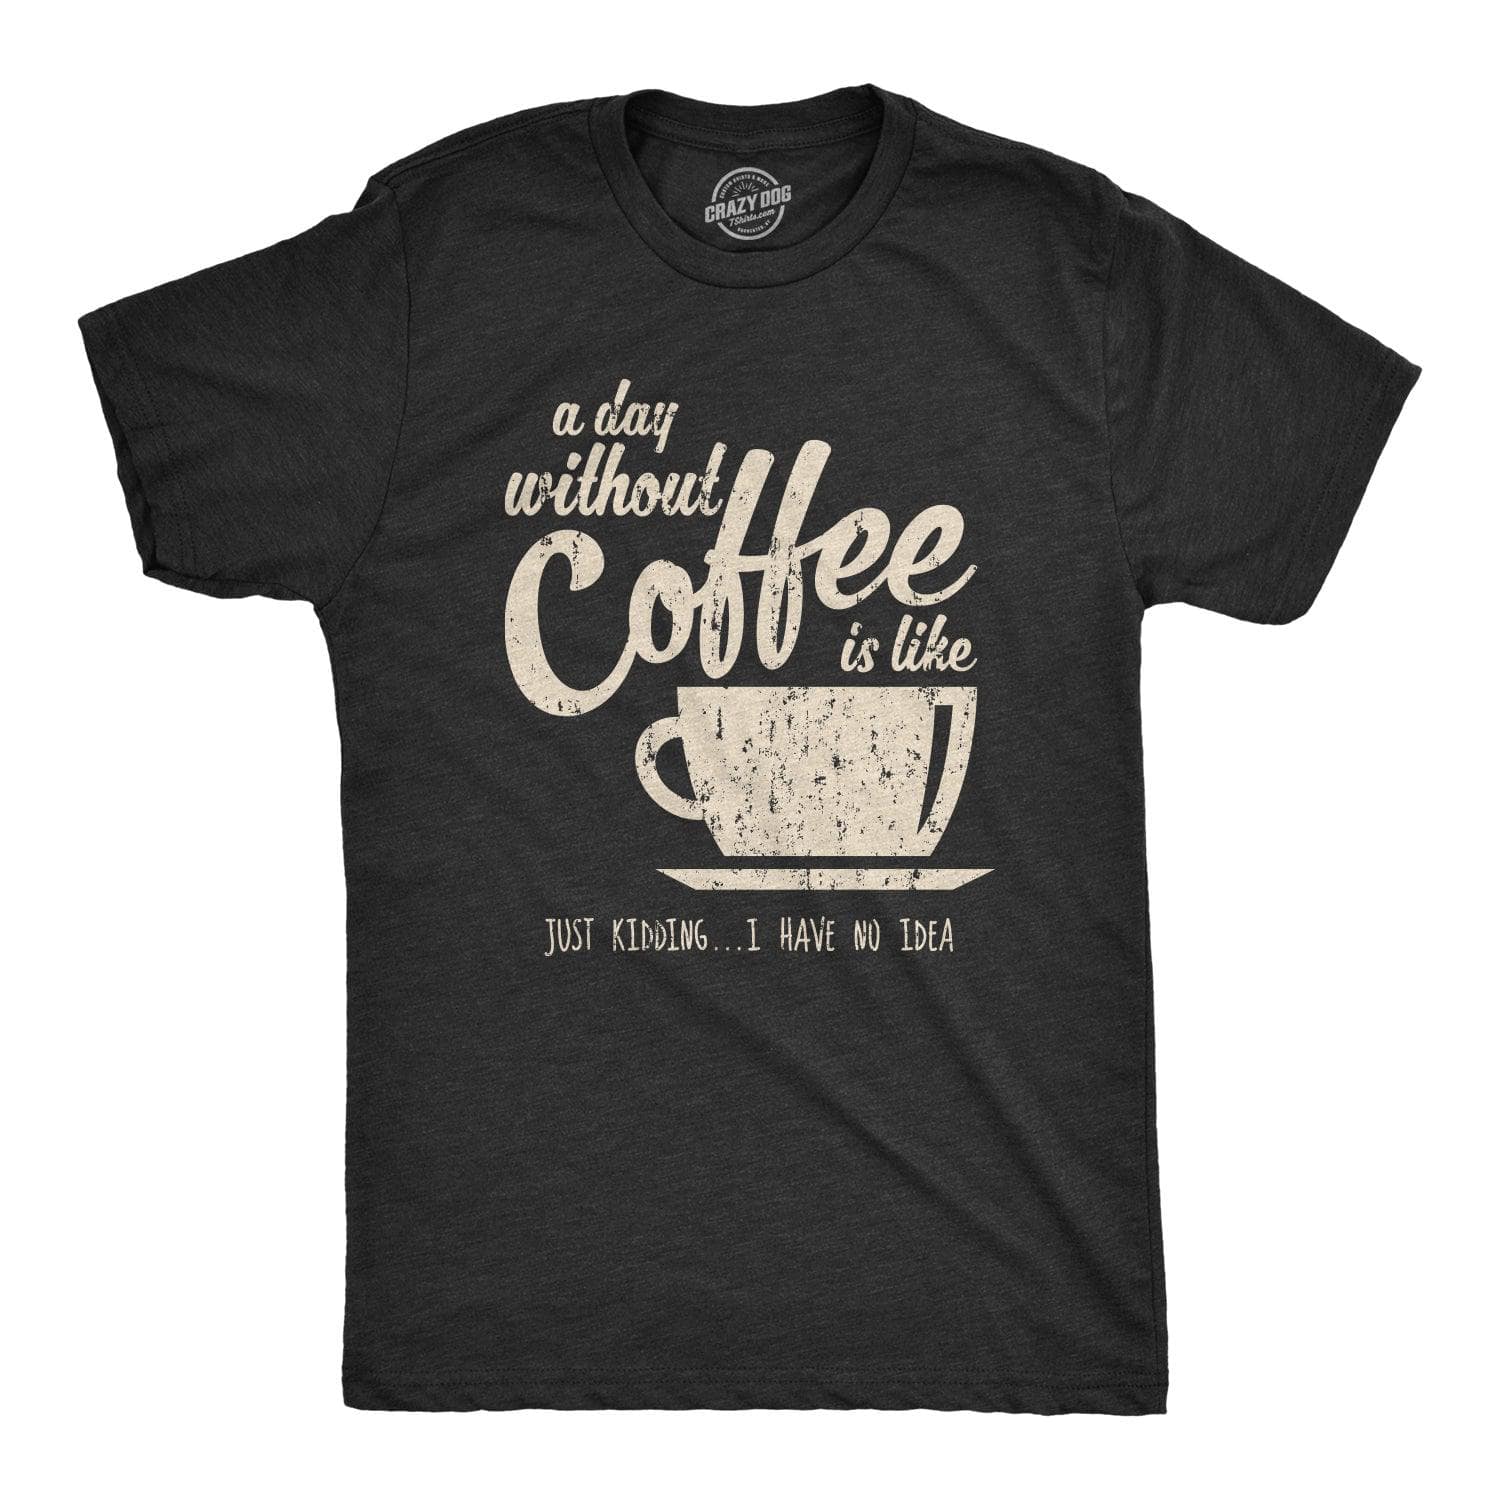 A Day Without Coffee Is Like Just Kidding I Have No Idea Men's Tshirt  -  Crazy Dog T-Shirts